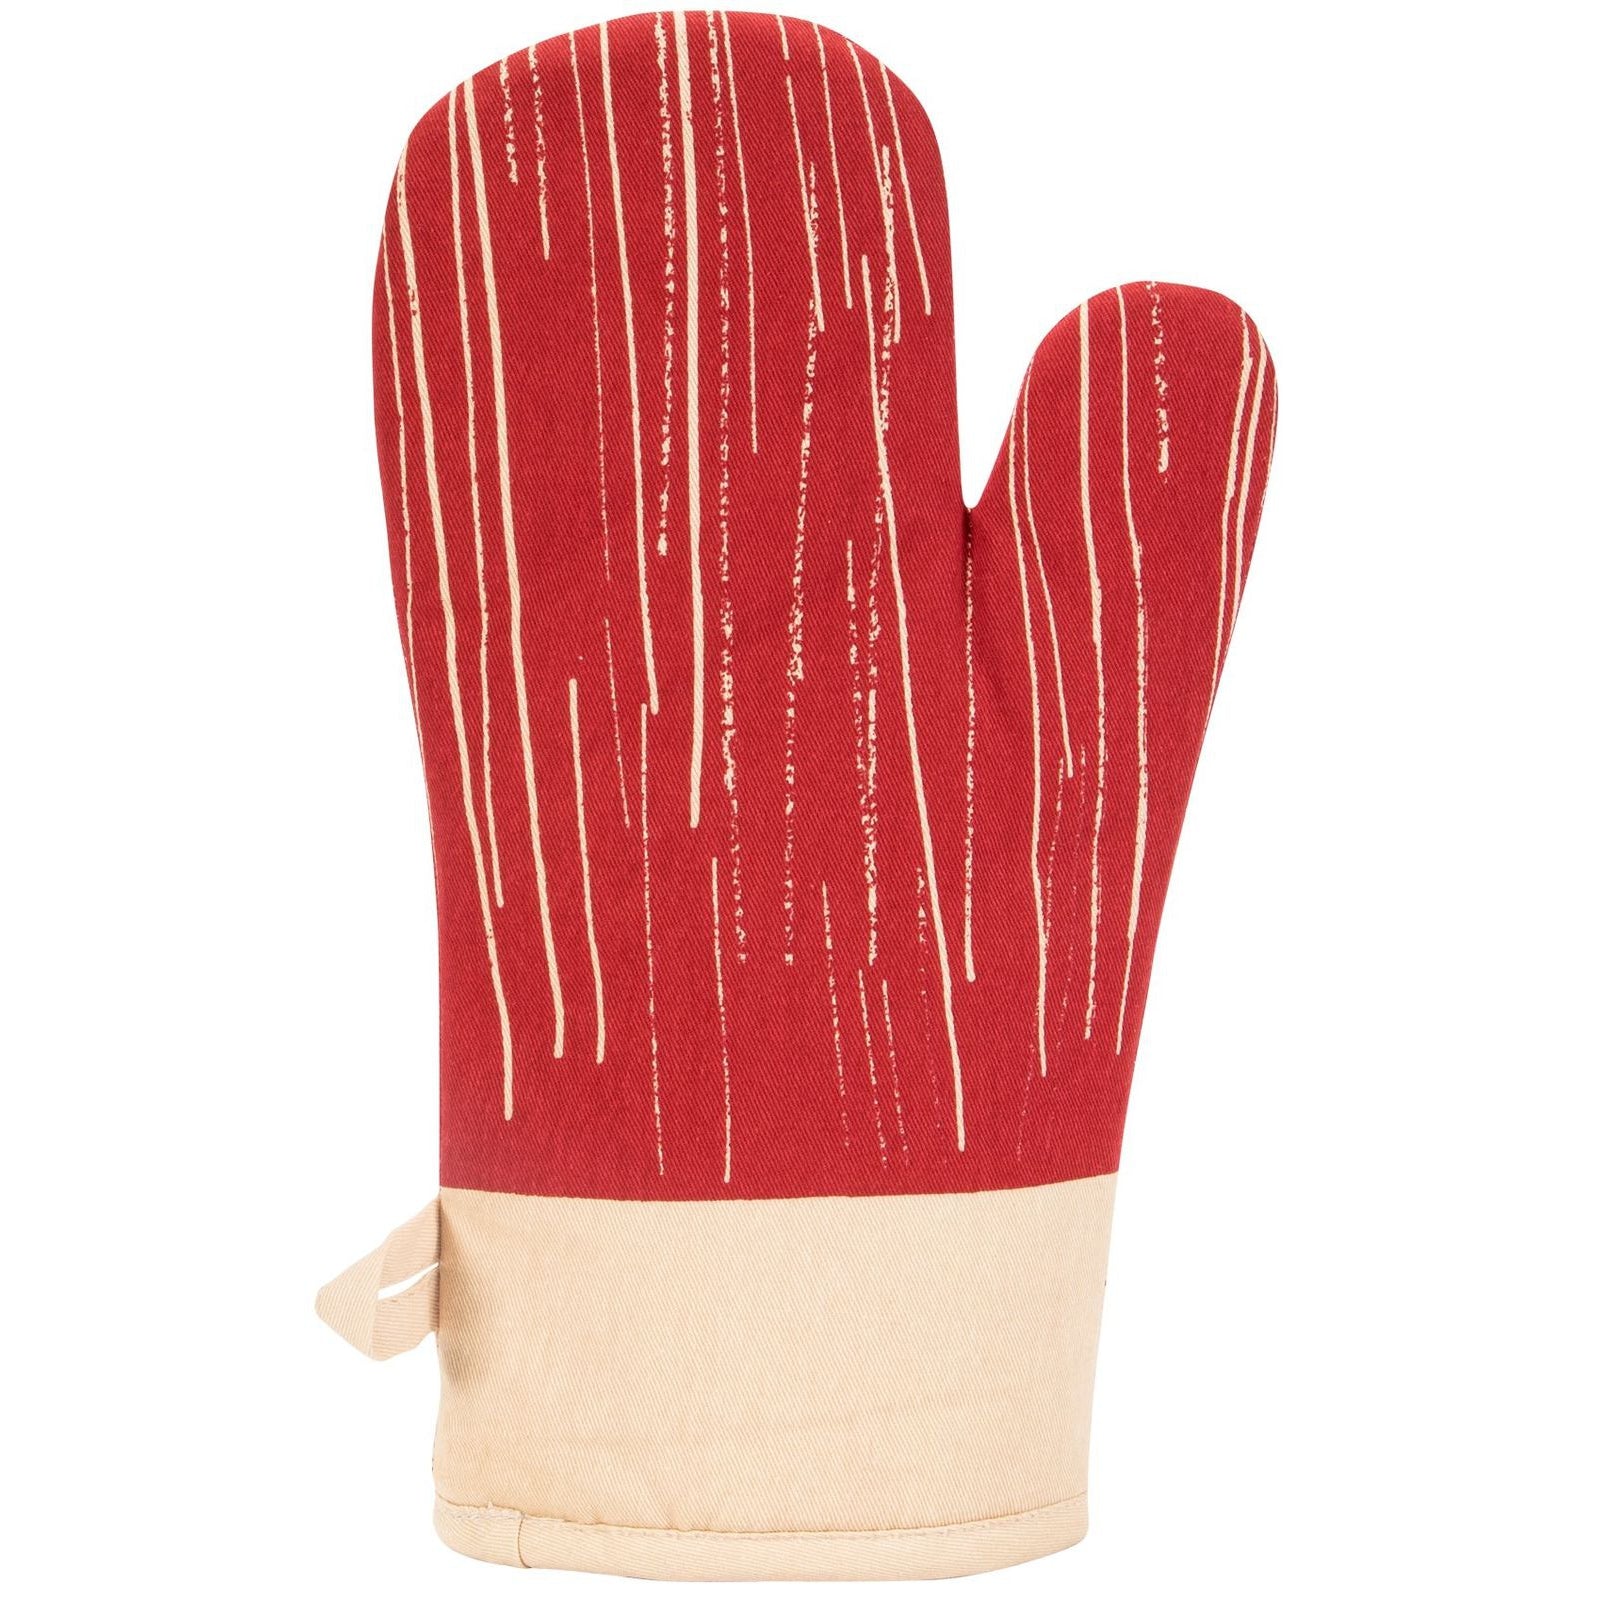 Made from Scratch Oven Mitt in Red and White Cat Design